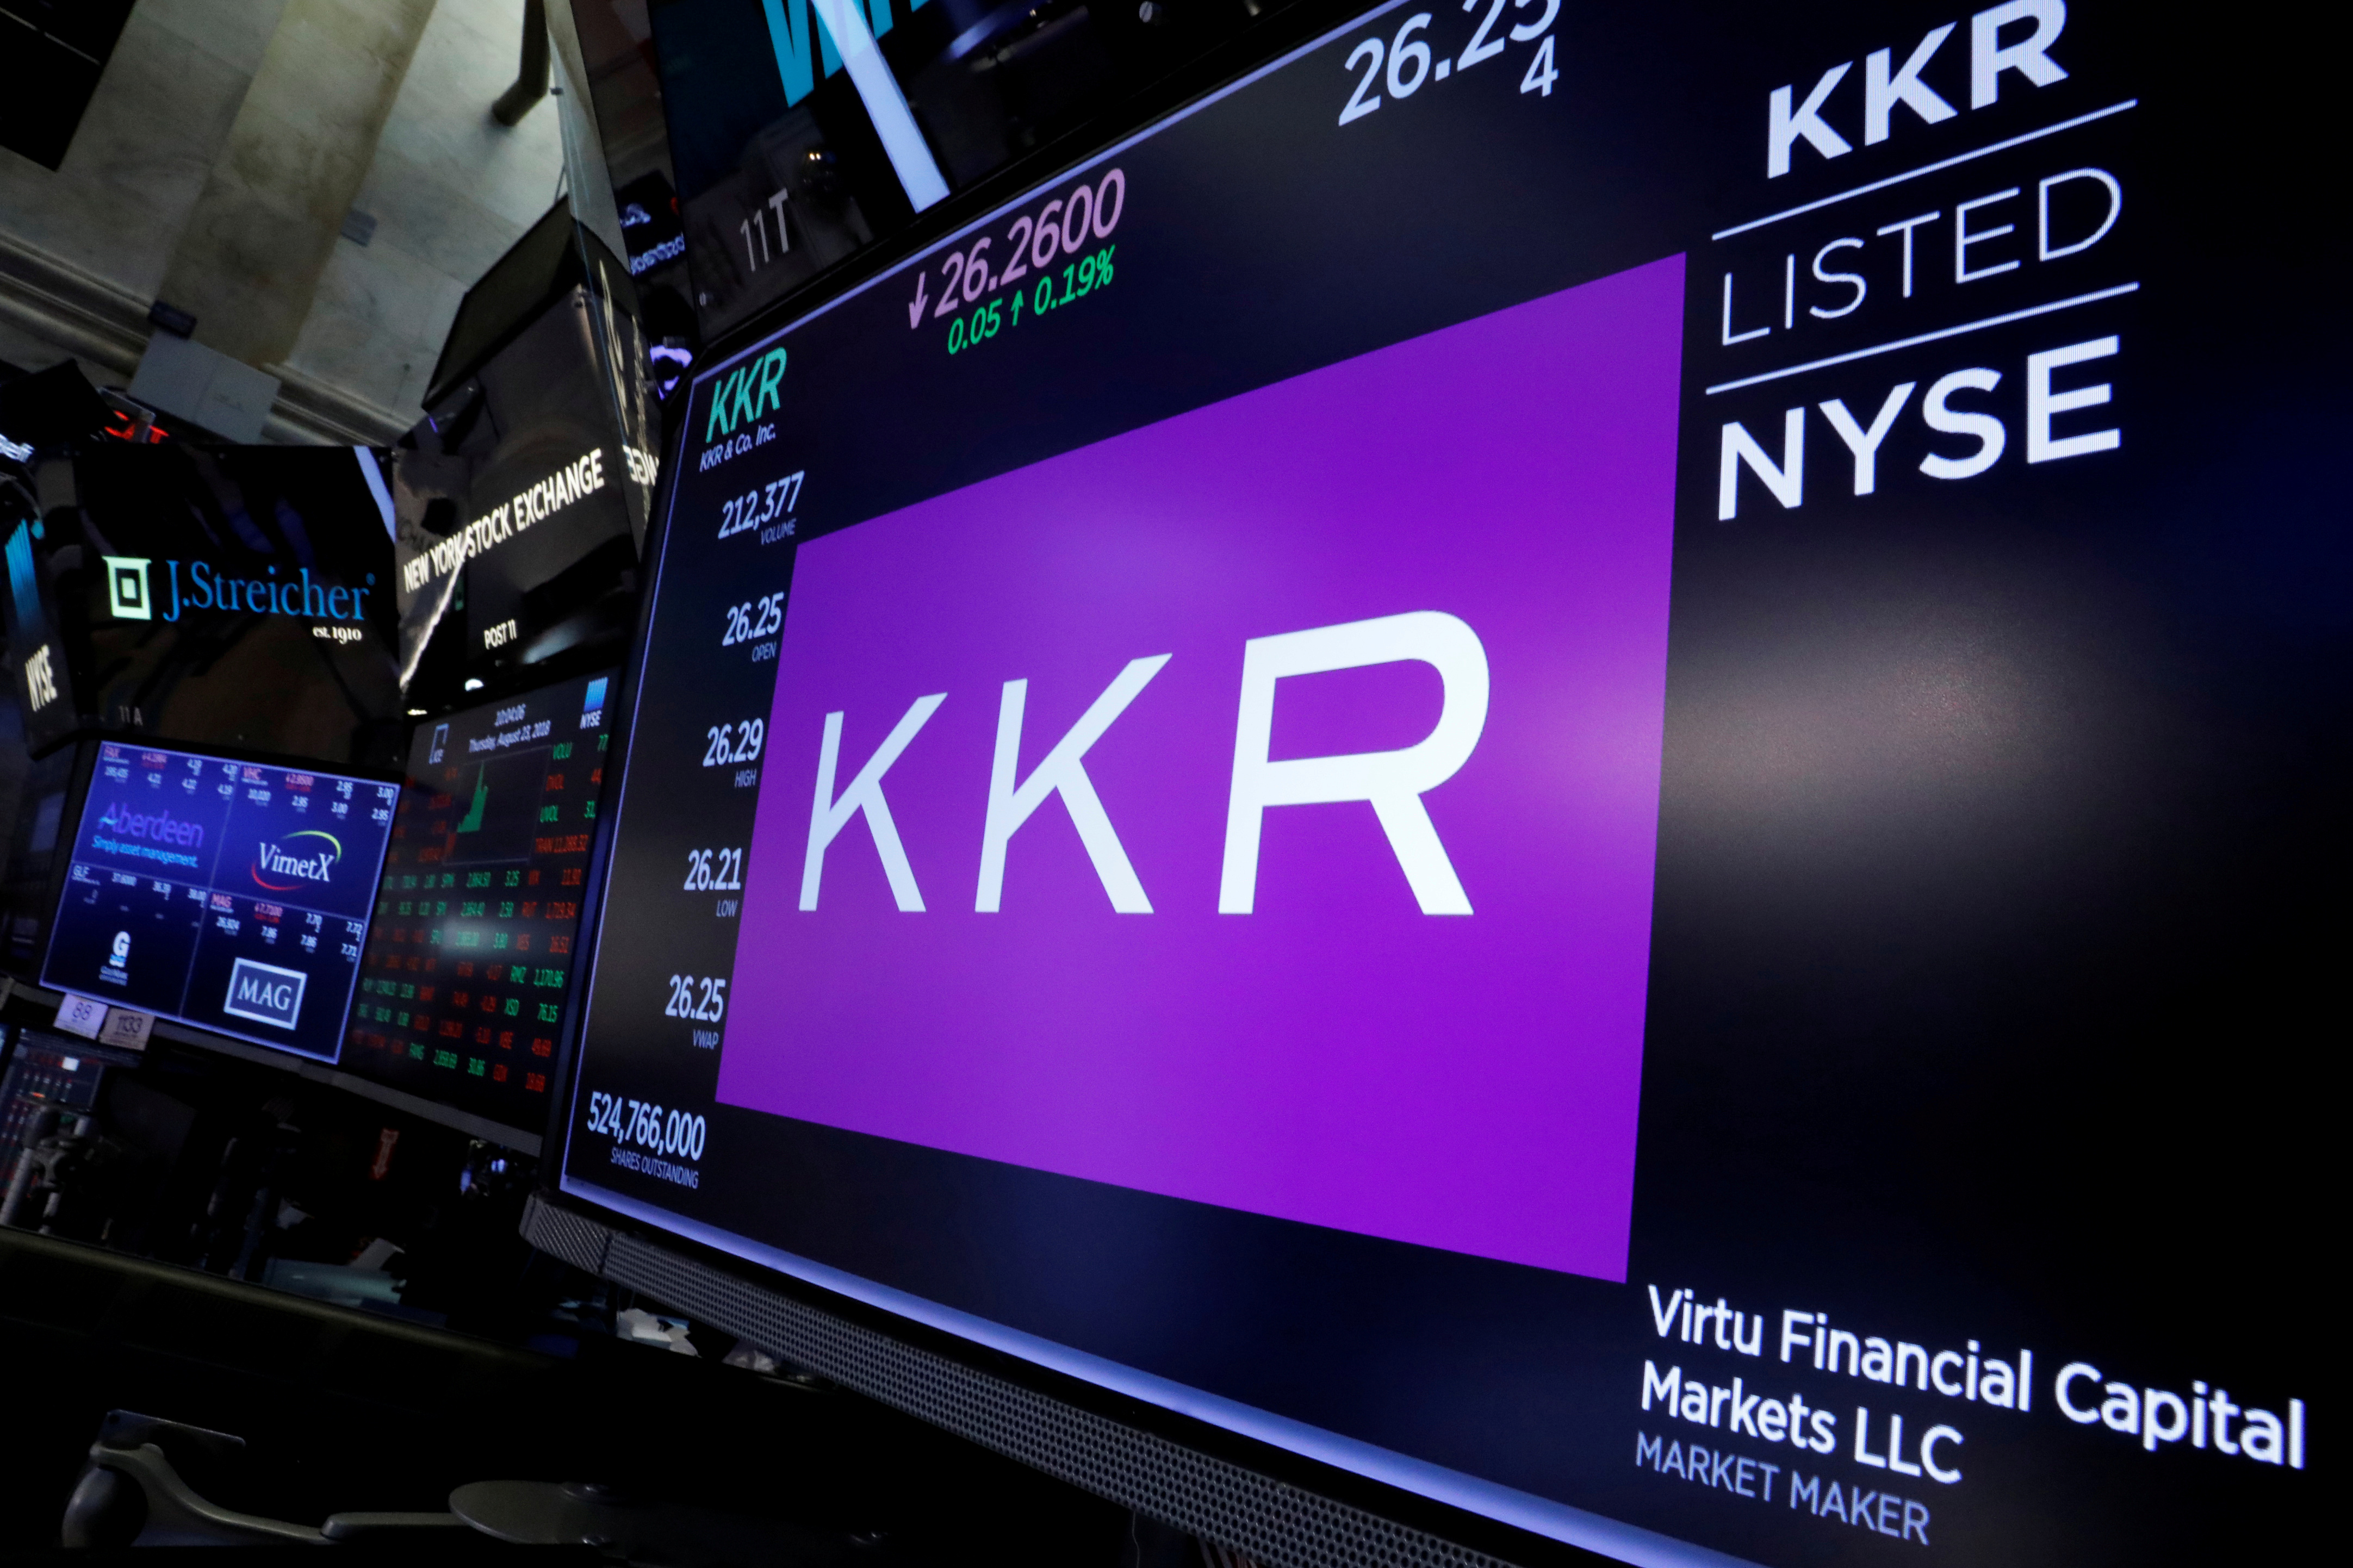 KKR earnings surge 63% on strong capital market business | Reuters